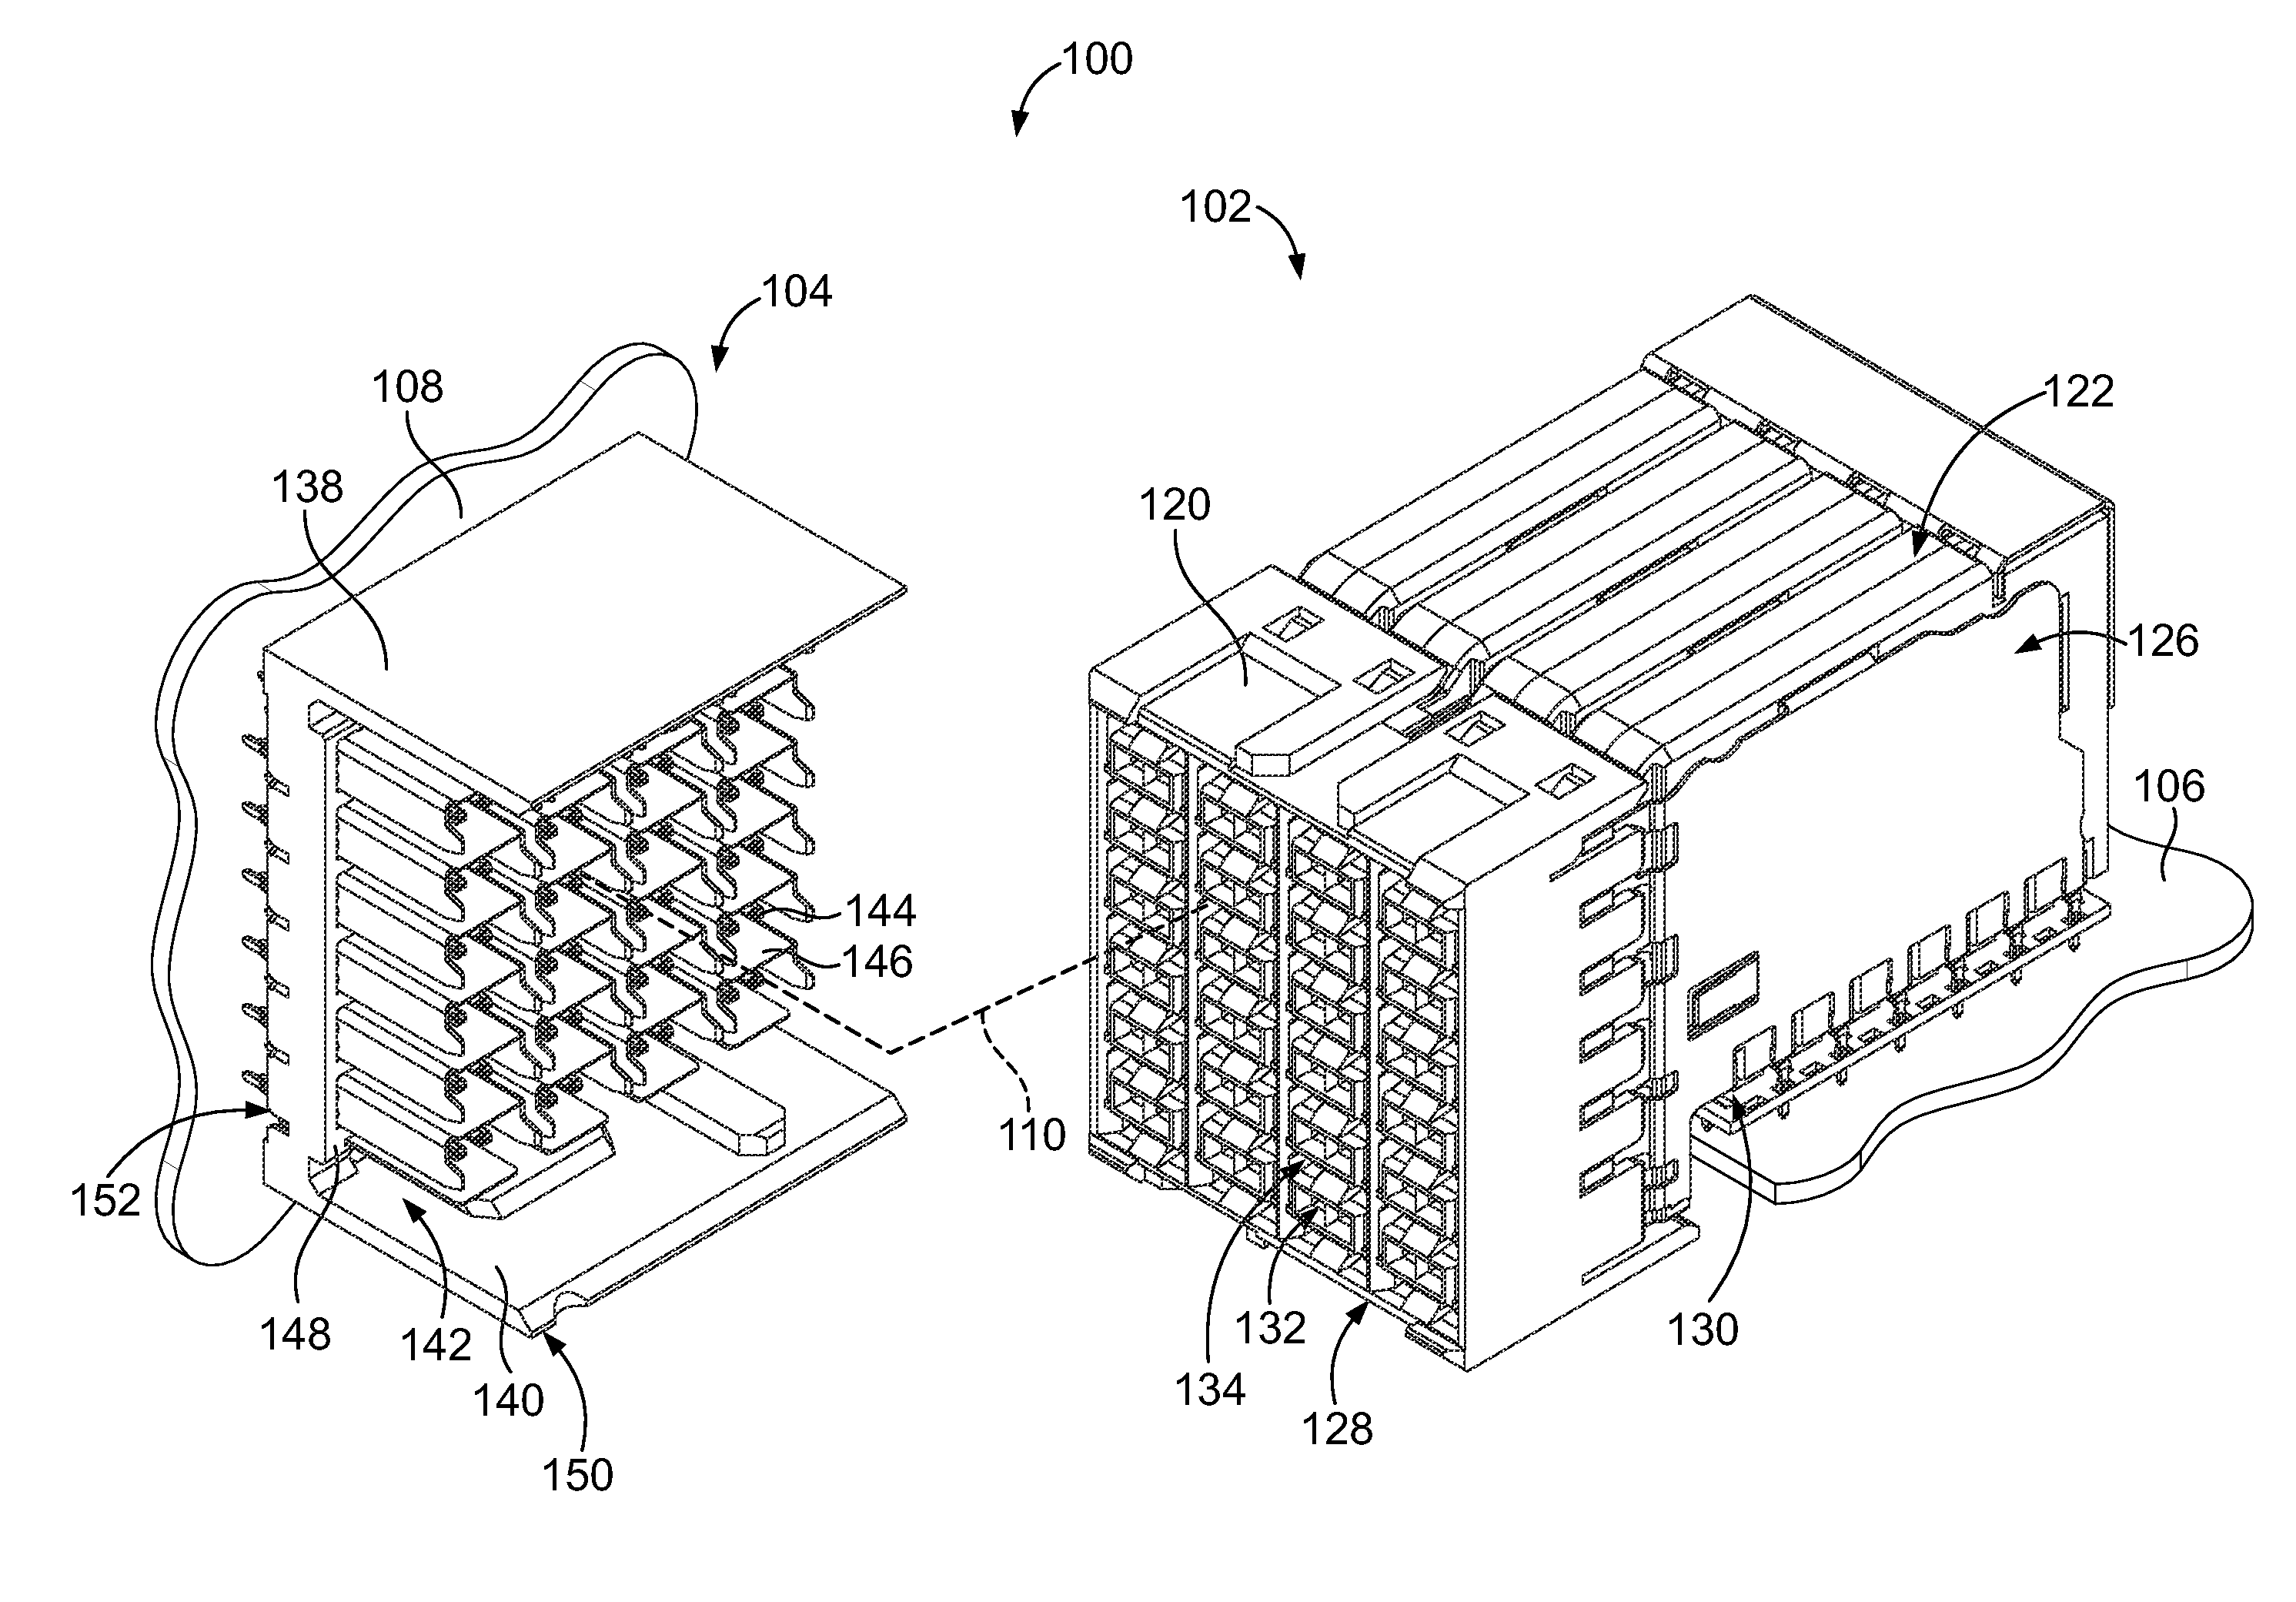 Grounding structures for a receptacle assembly